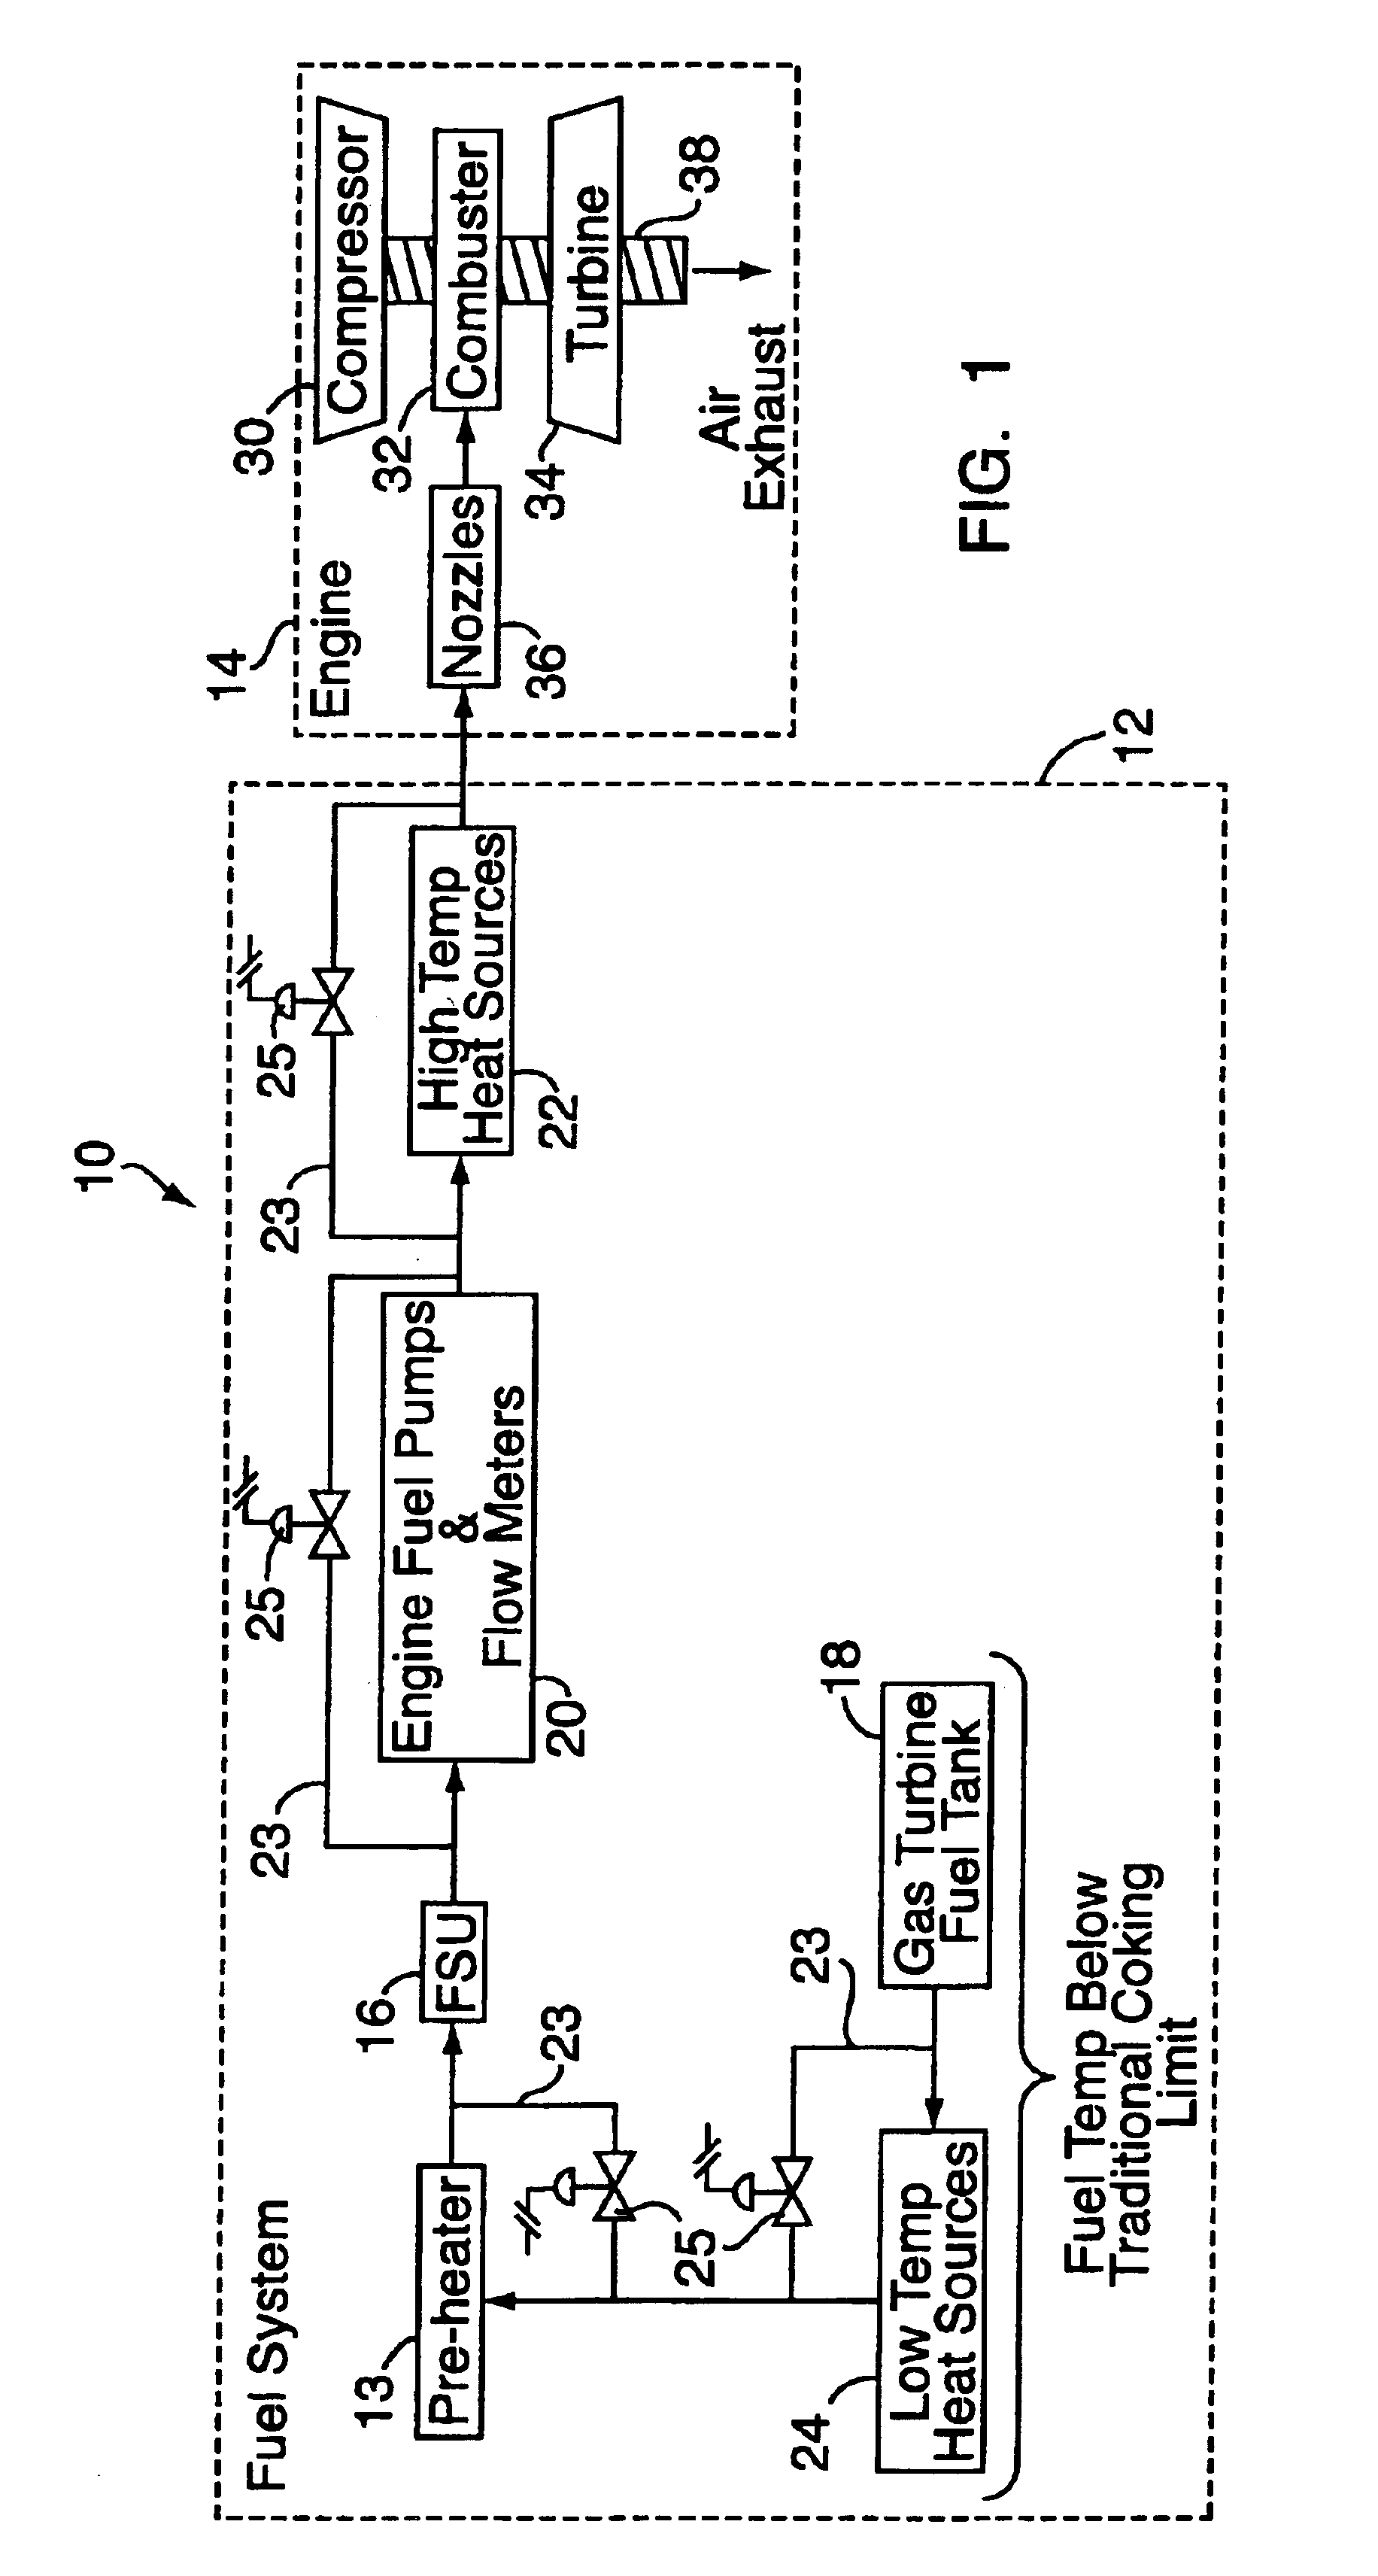 System and method for thermal management